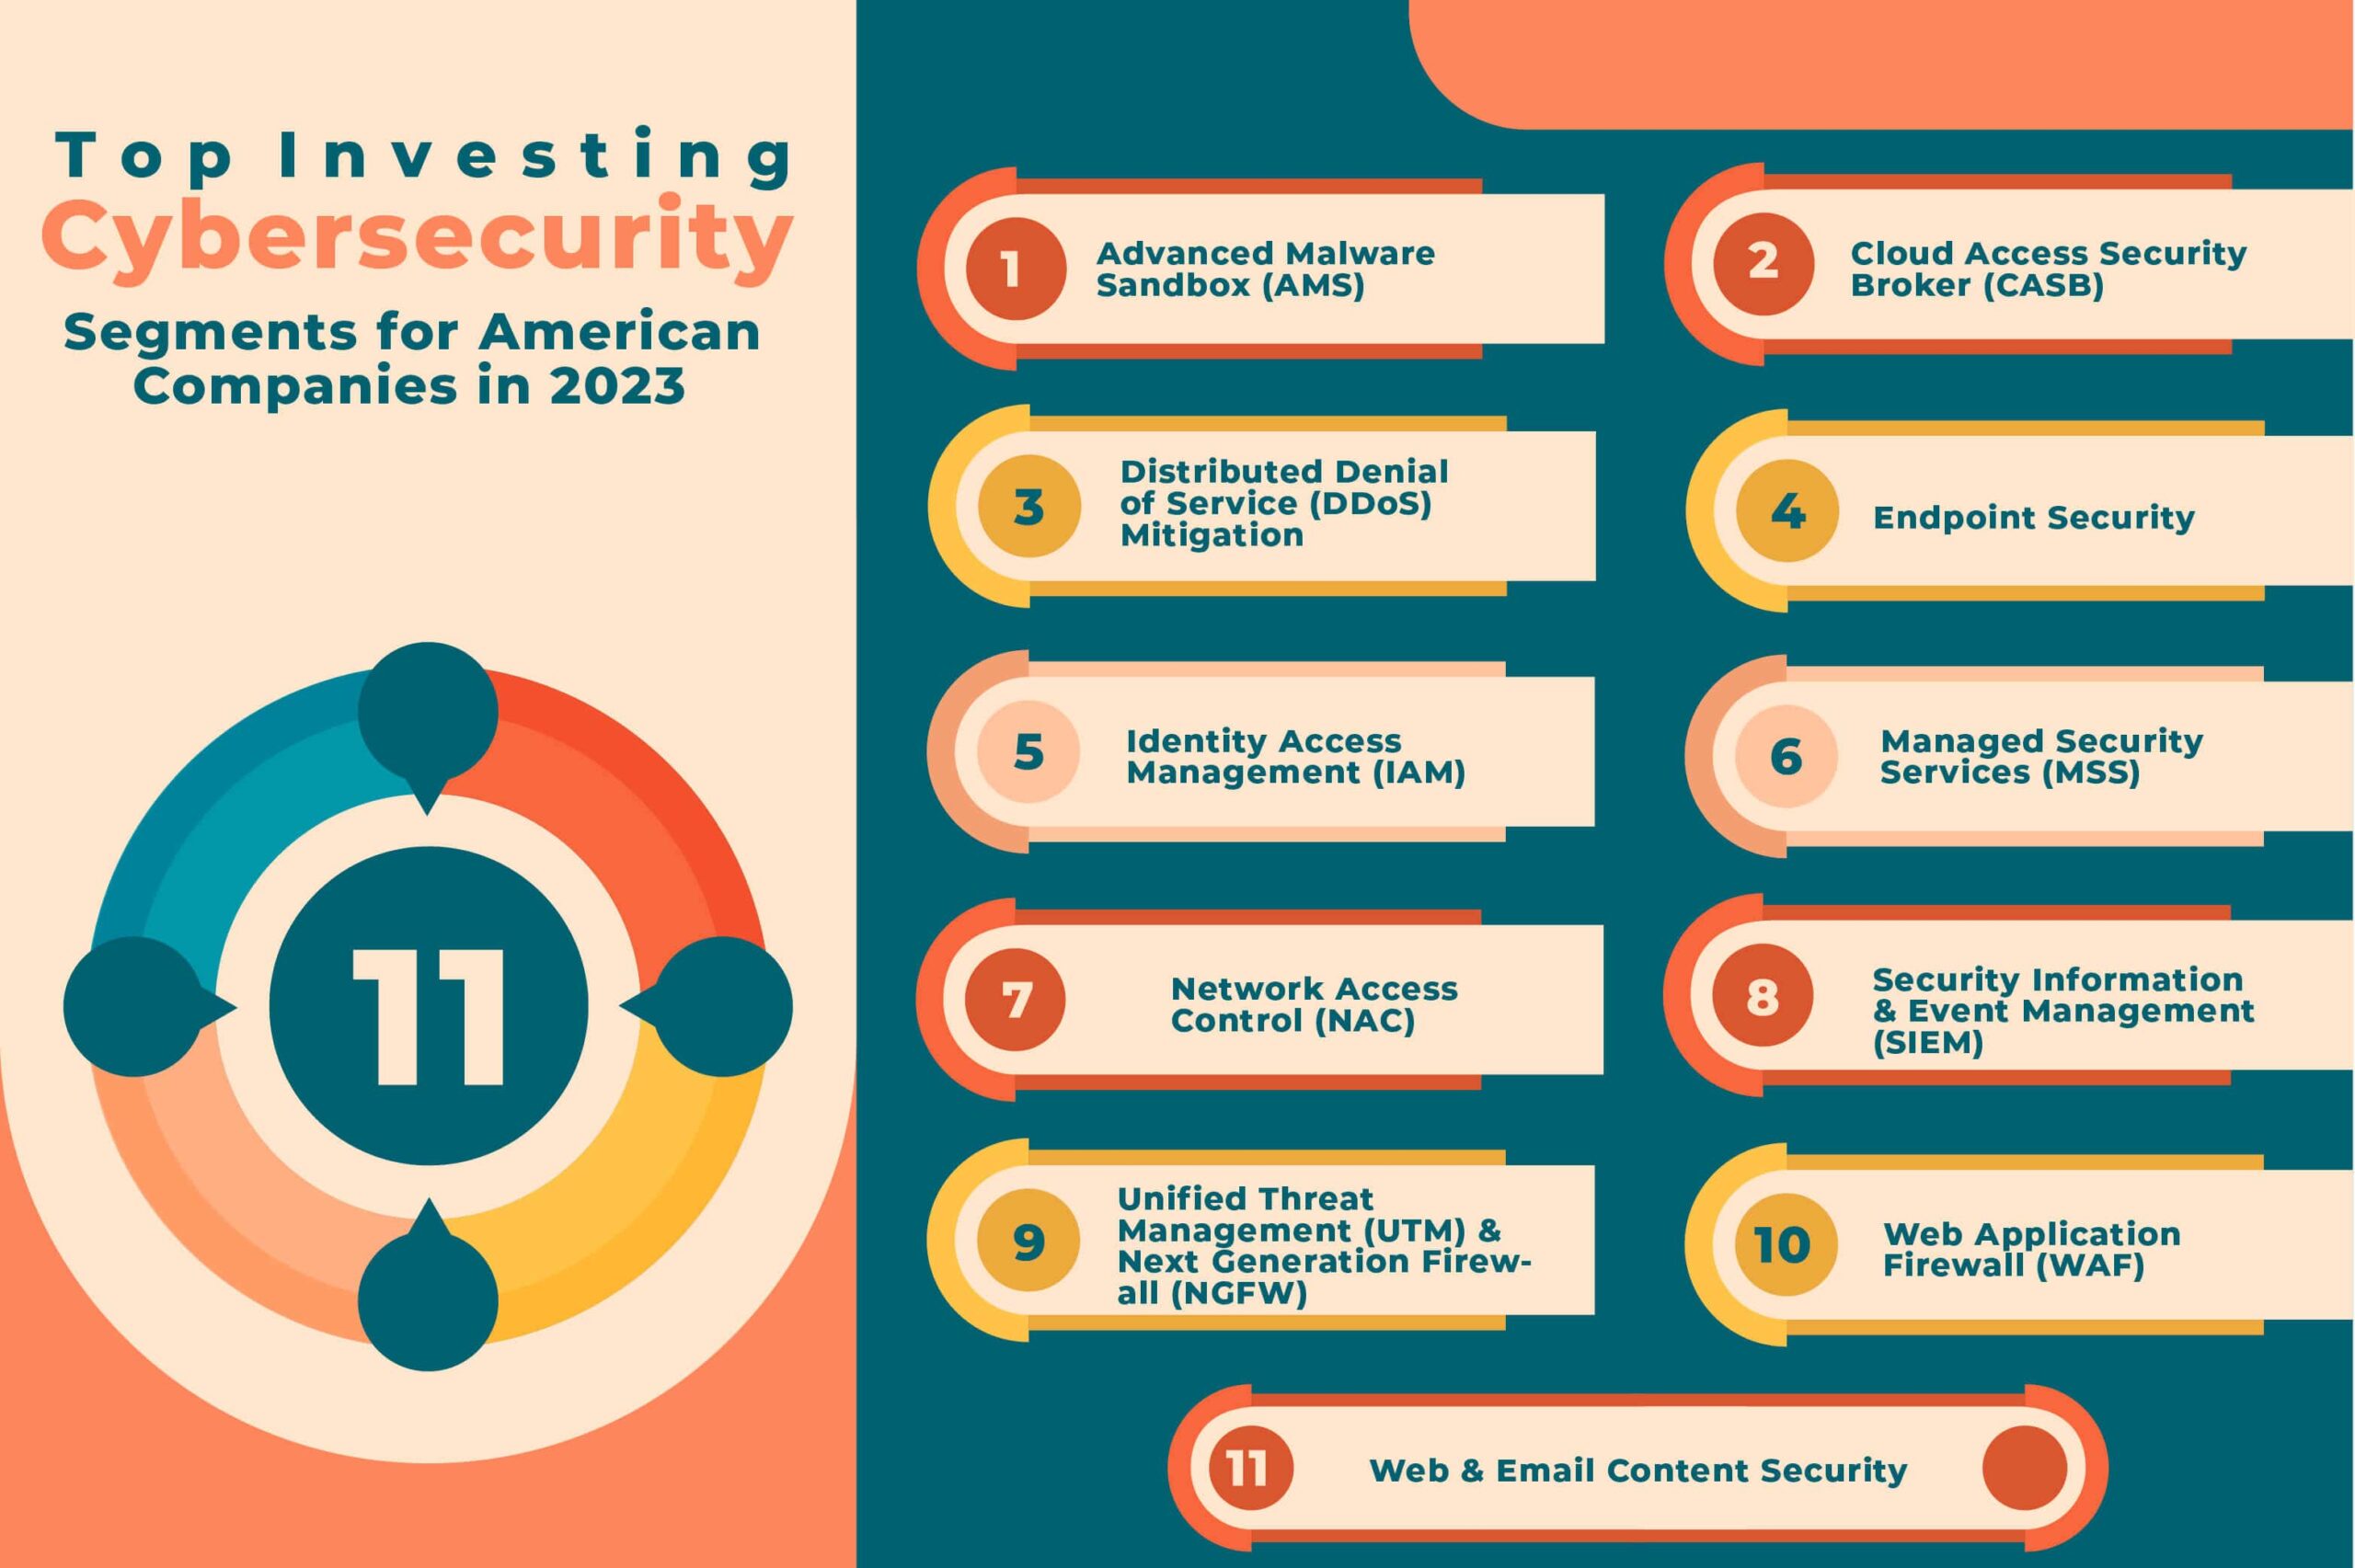 Top Investing Cybersecurity Segments for American Companies in 2023 